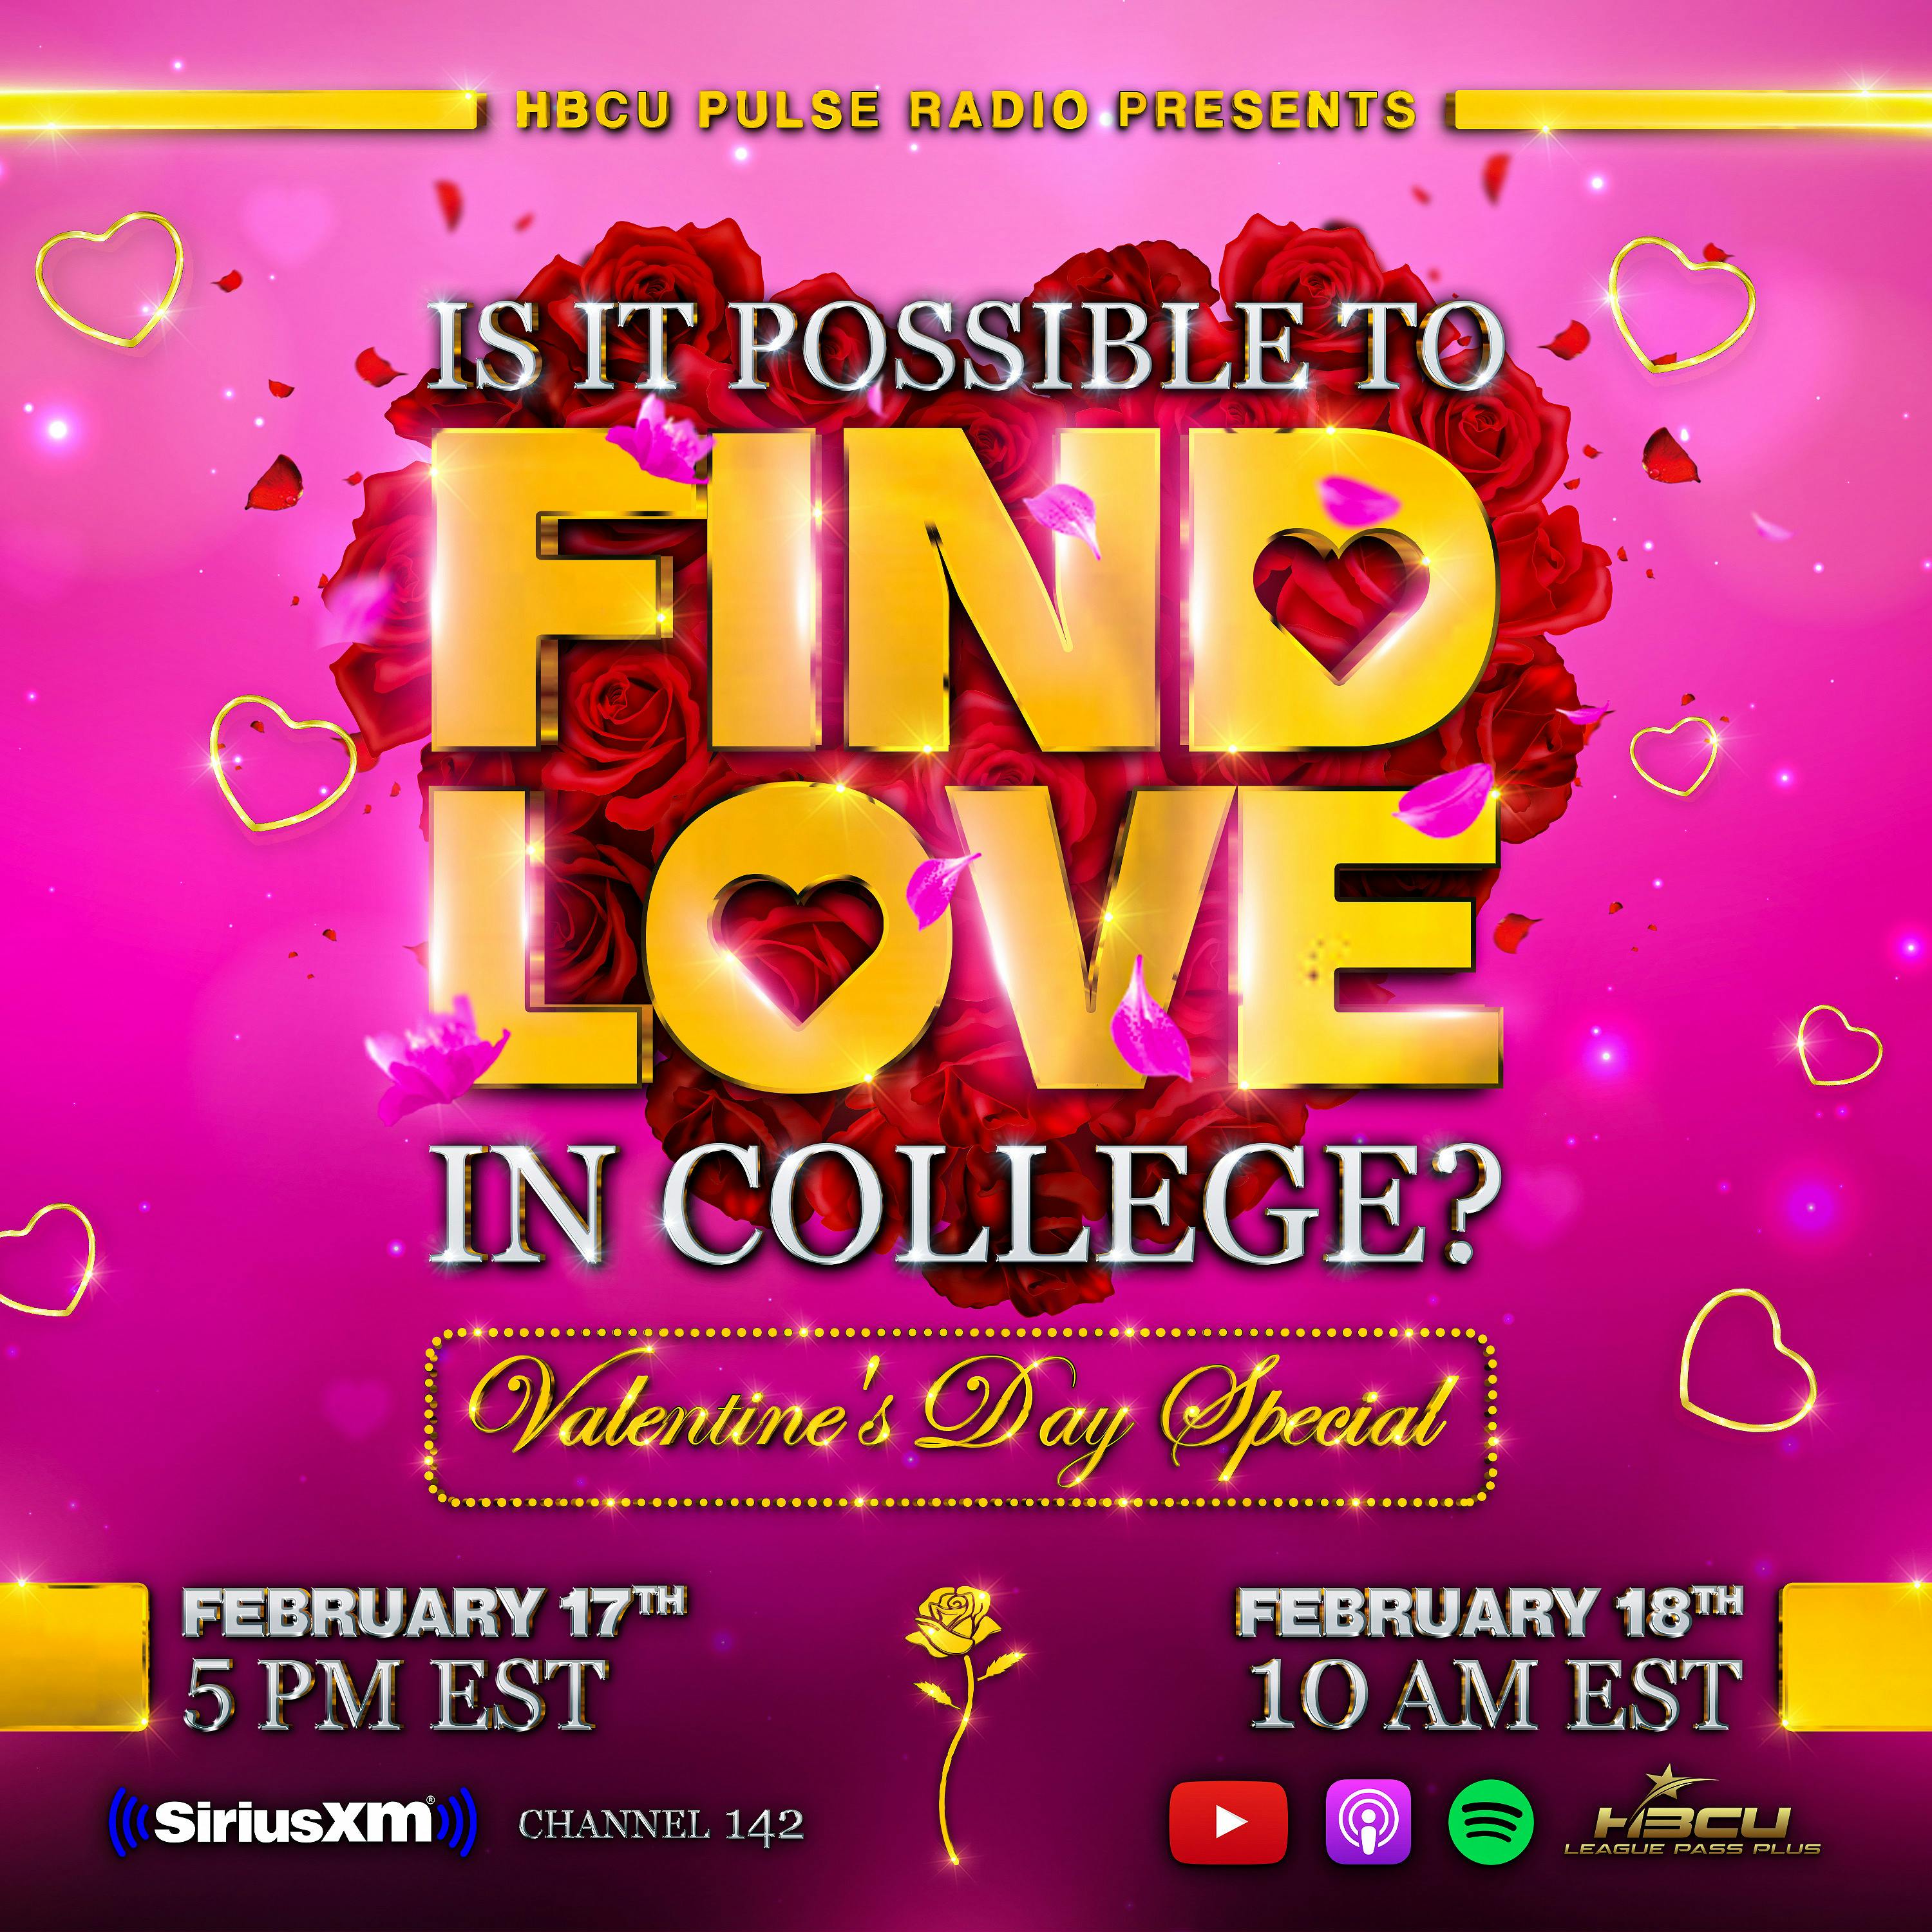 Is It Possible To Find Love In College? (HBCU Pulse Valentine's Day Special)